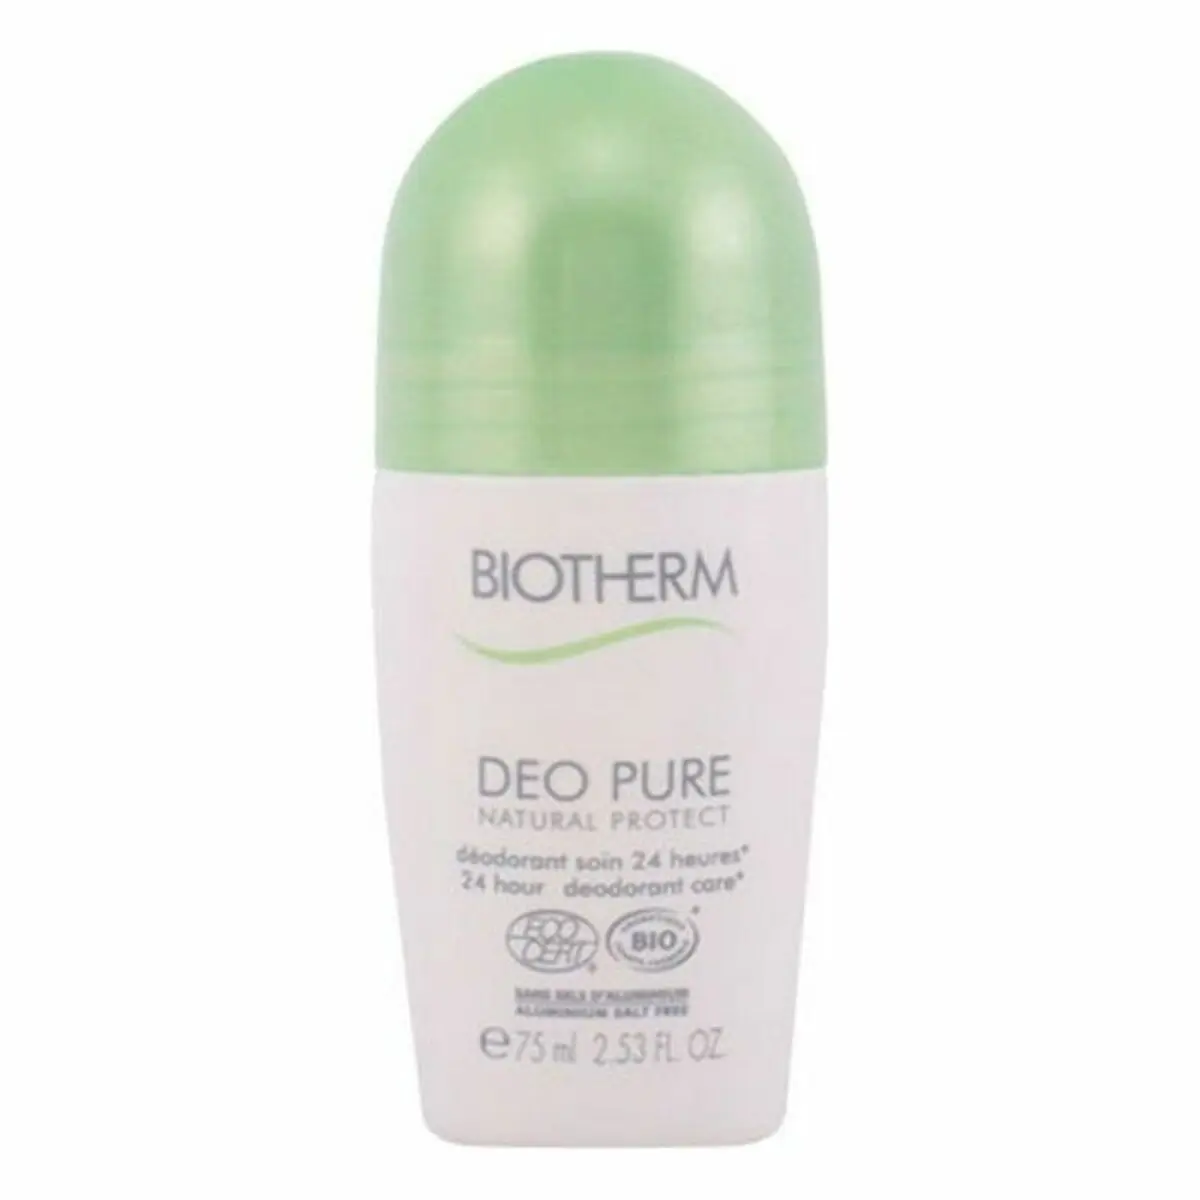 Deodorante Roll-on Deo Pure Natural Protect Biotherm BIOTHERM-496954 75 ml